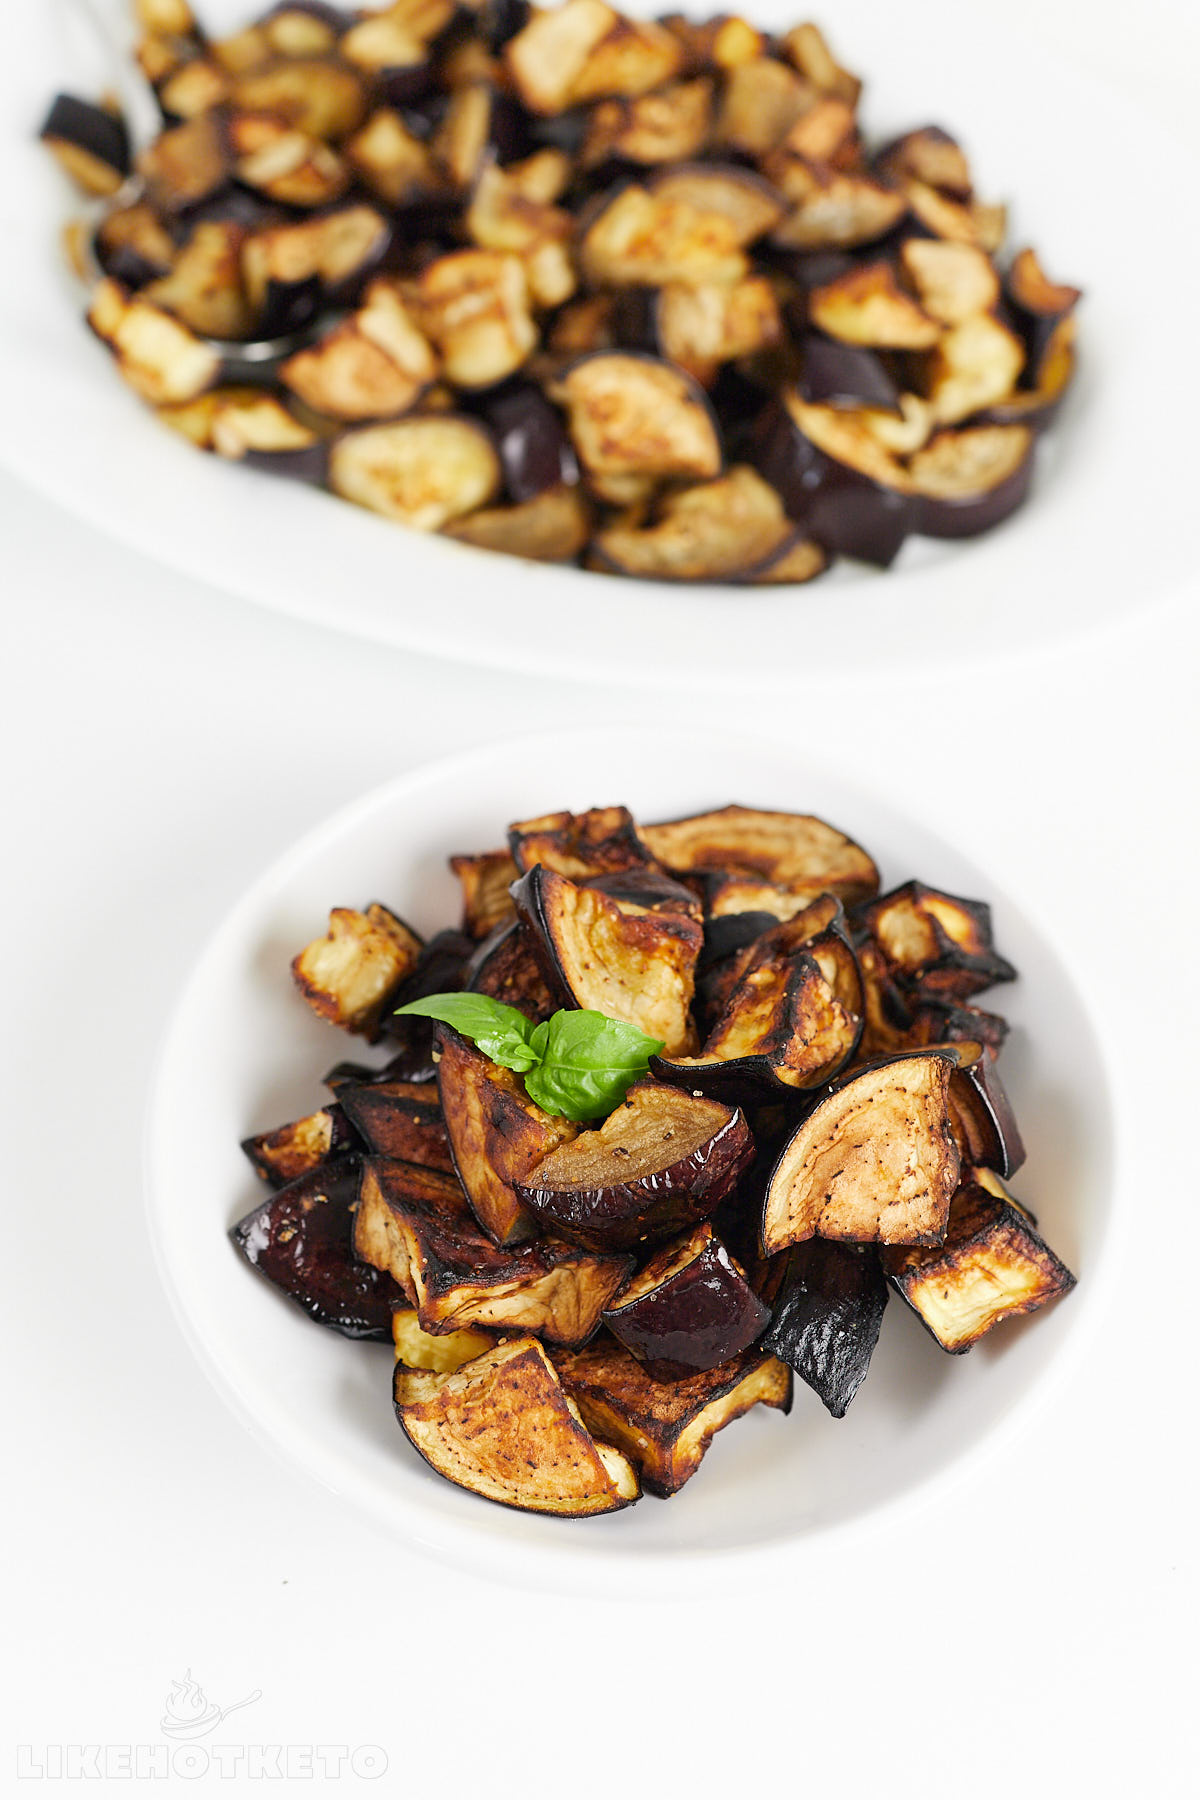 A serving of roasted eggplants on a small dish.